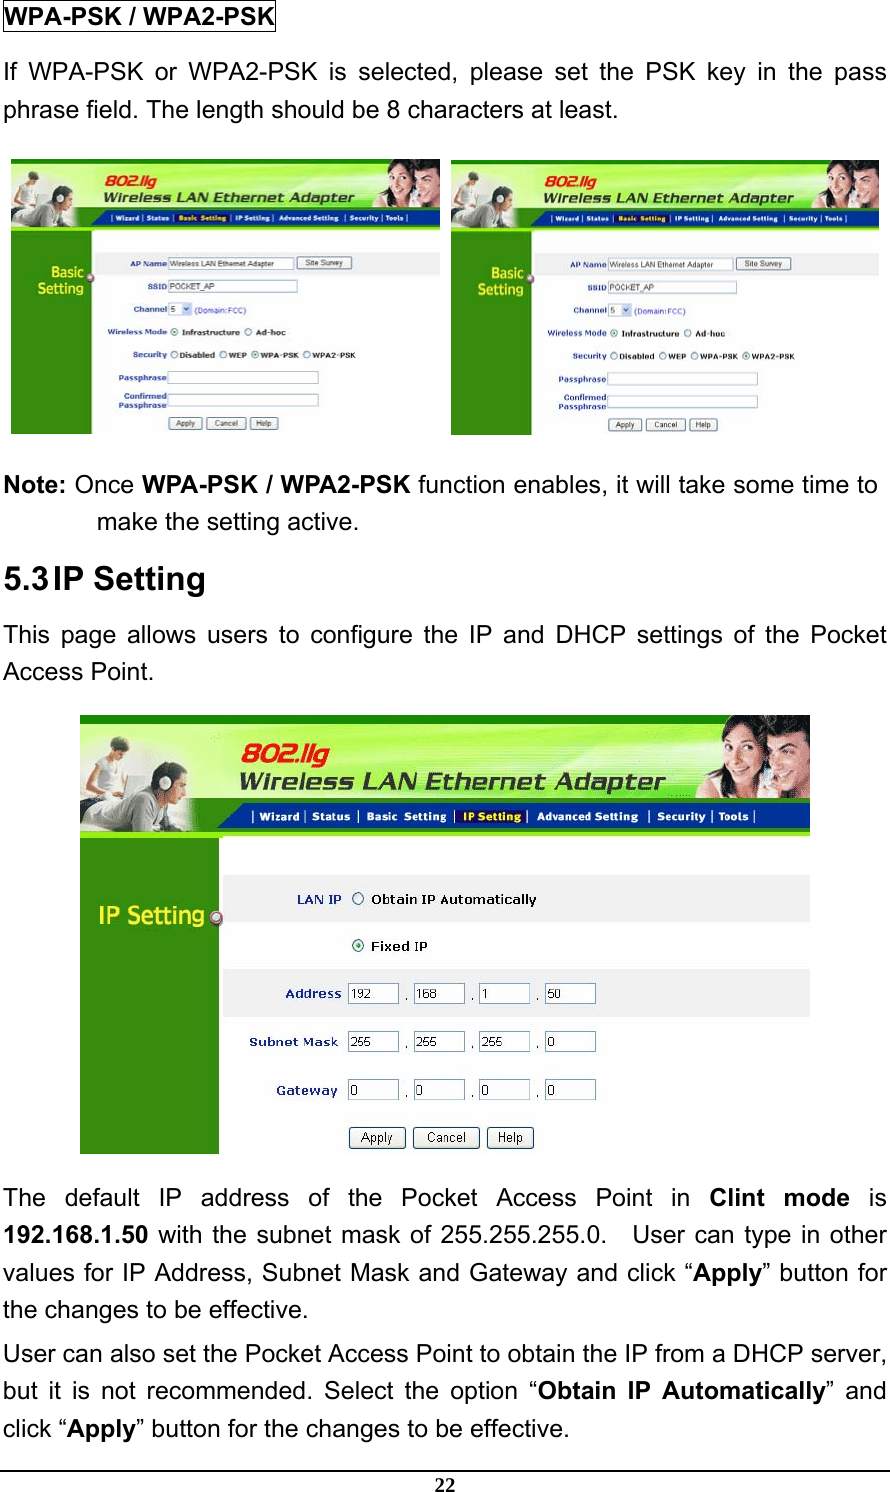 22 WPA-PSK / WPA2-PSK If WPA-PSK or WPA2-PSK is selected, please set the PSK key in the pass phrase field. The length should be 8 characters at least.    Note: Once WPA-PSK / WPA2-PSK function enables, it will take some time to make the setting active. 5.3 IP  Setting This page allows users to configure the IP and DHCP settings of the Pocket Access Point.  The default IP address of the Pocket Access Point in Clint mode is 192.168.1.50 with the subnet mask of 255.255.255.0.    User can type in other values for IP Address, Subnet Mask and Gateway and click “Apply” button for the changes to be effective.   User can also set the Pocket Access Point to obtain the IP from a DHCP server, but it is not recommended. Select the option “Obtain IP Automatically” and click “Apply” button for the changes to be effective. 